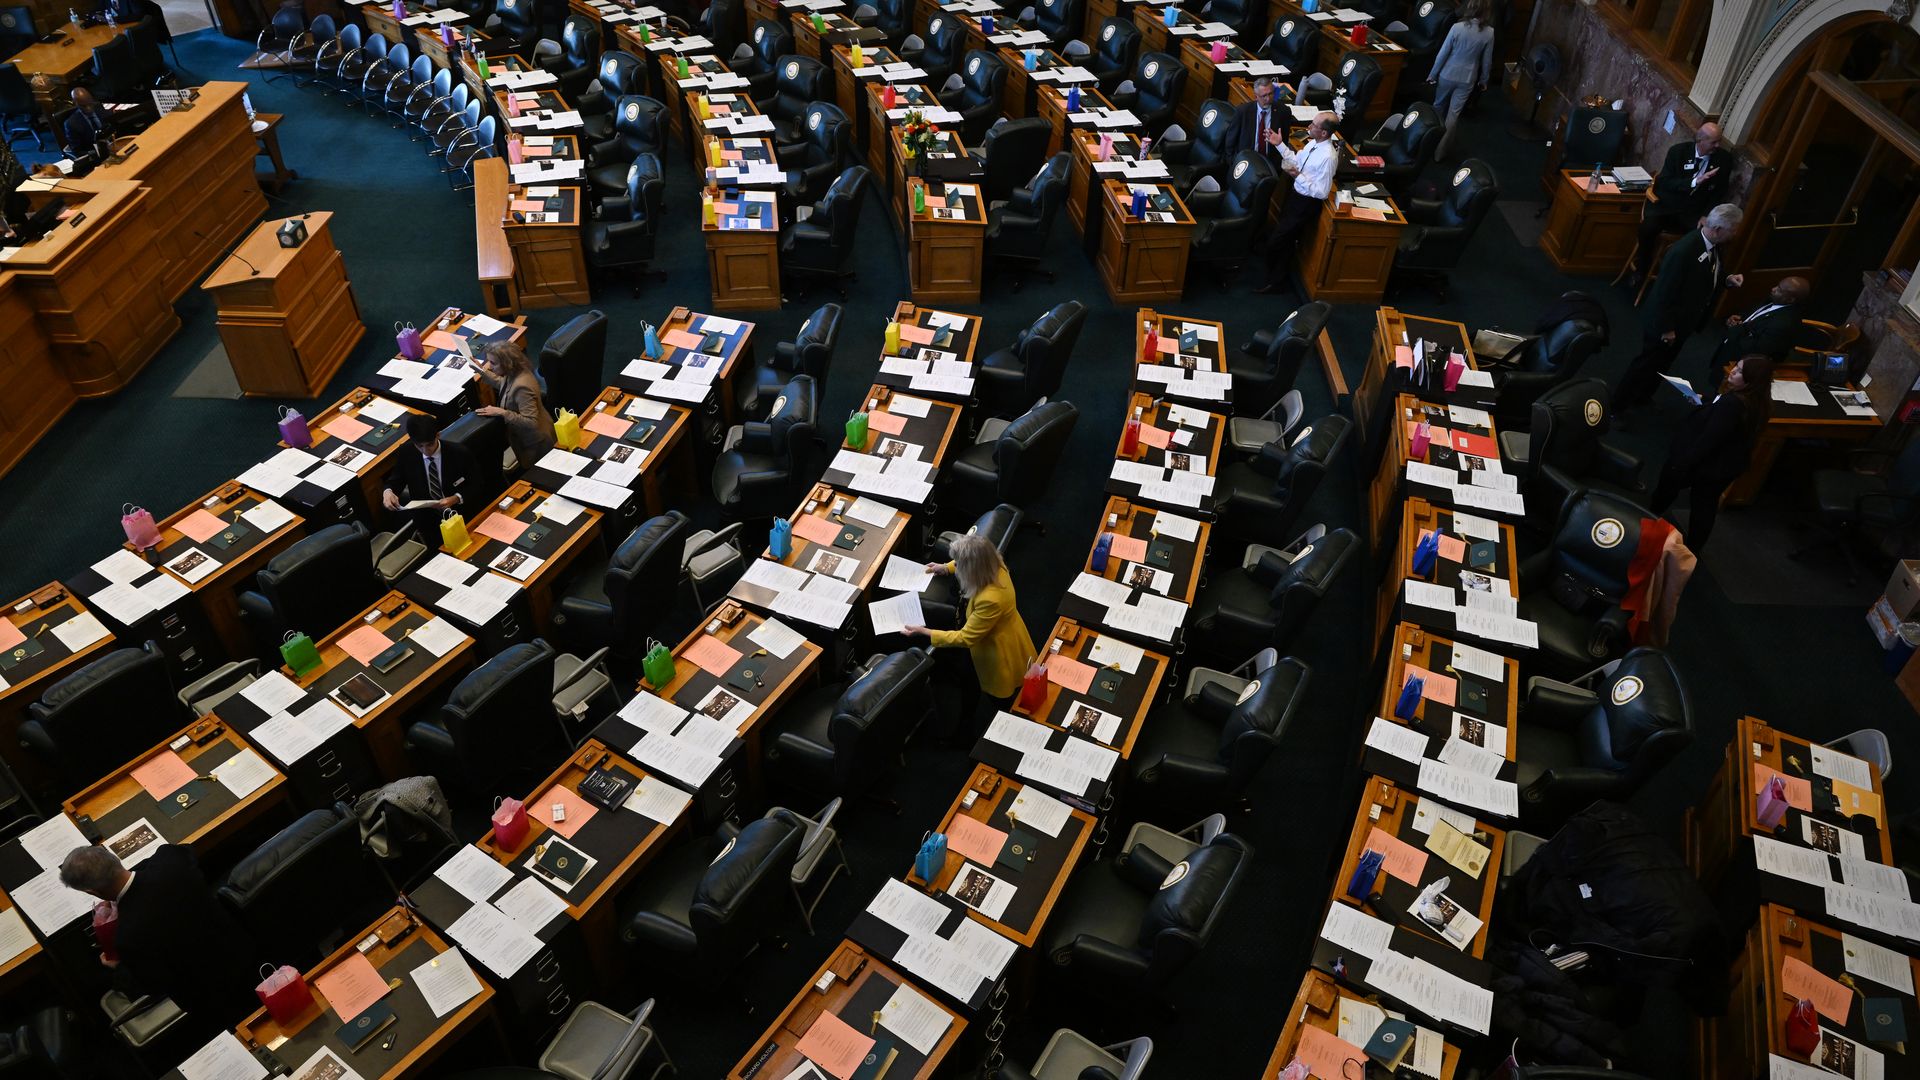 The Colorado House chambers are prepared for the first day of the 2023 legislative session. Photo: RJ Sangosti/Denver Post via Getty Images